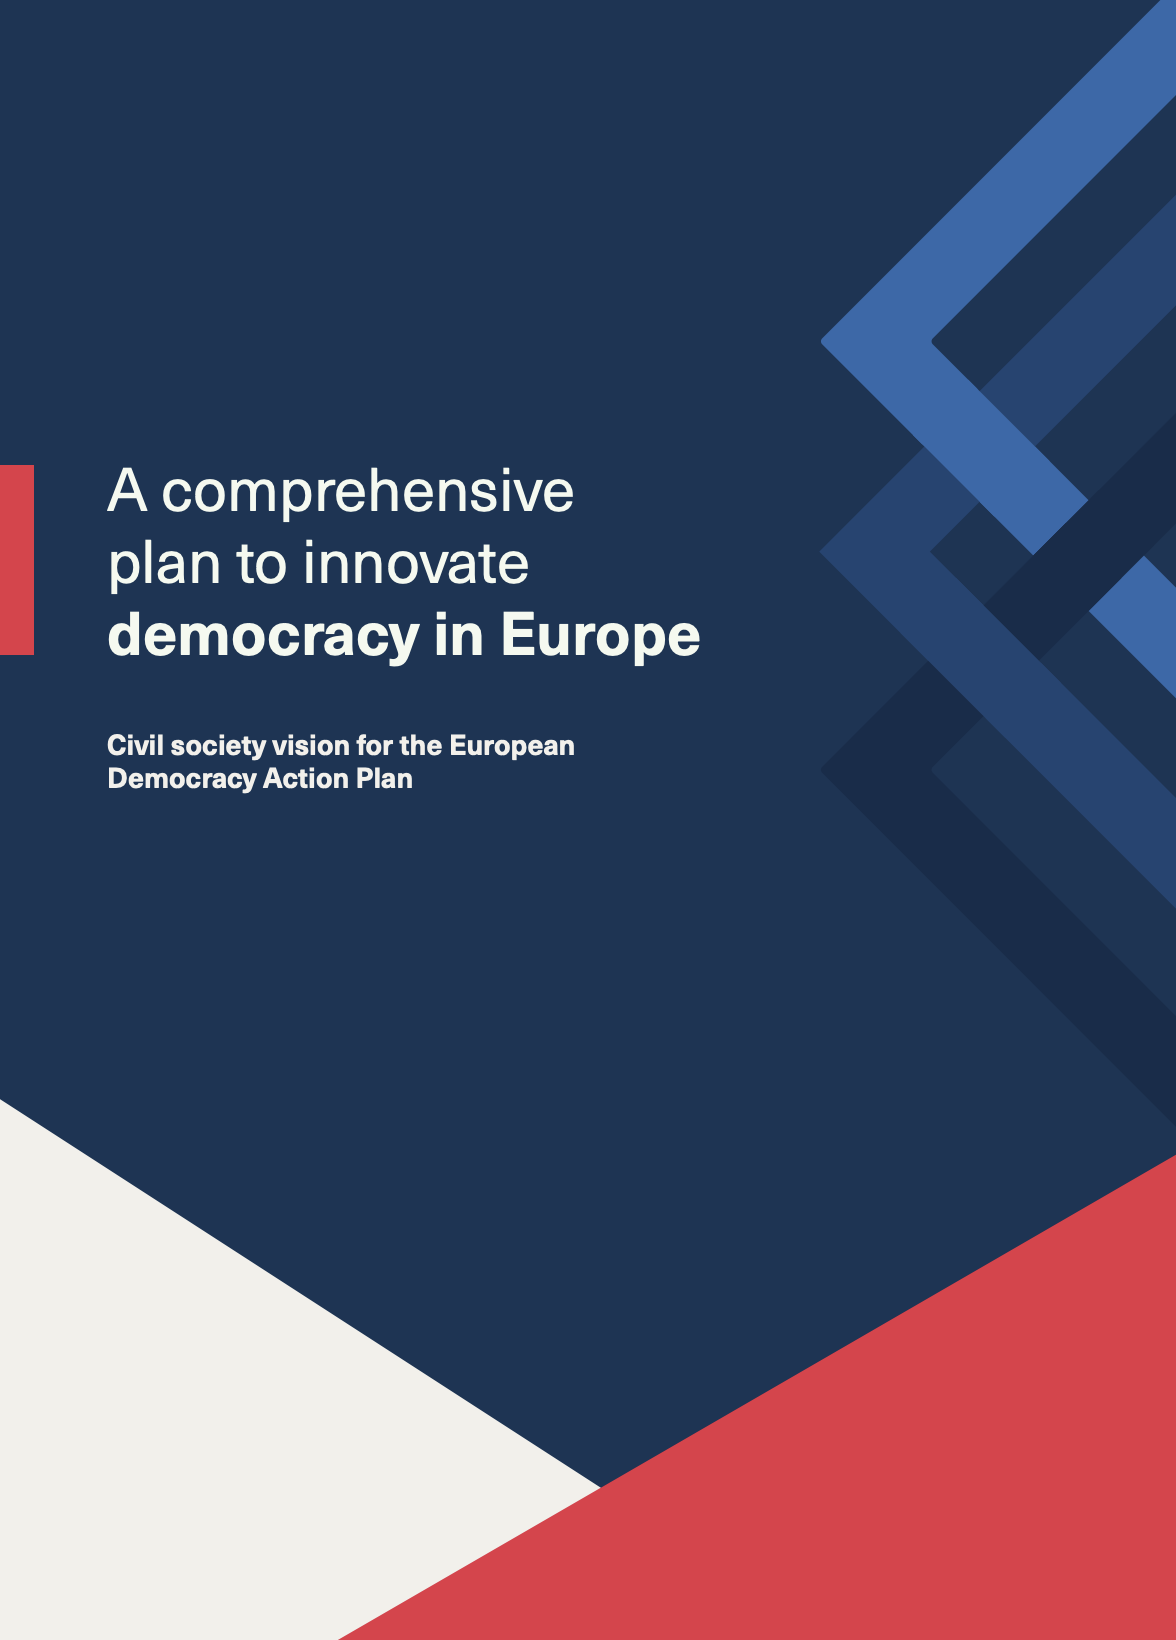 A comprehensive plan to innovate democracy in Europe